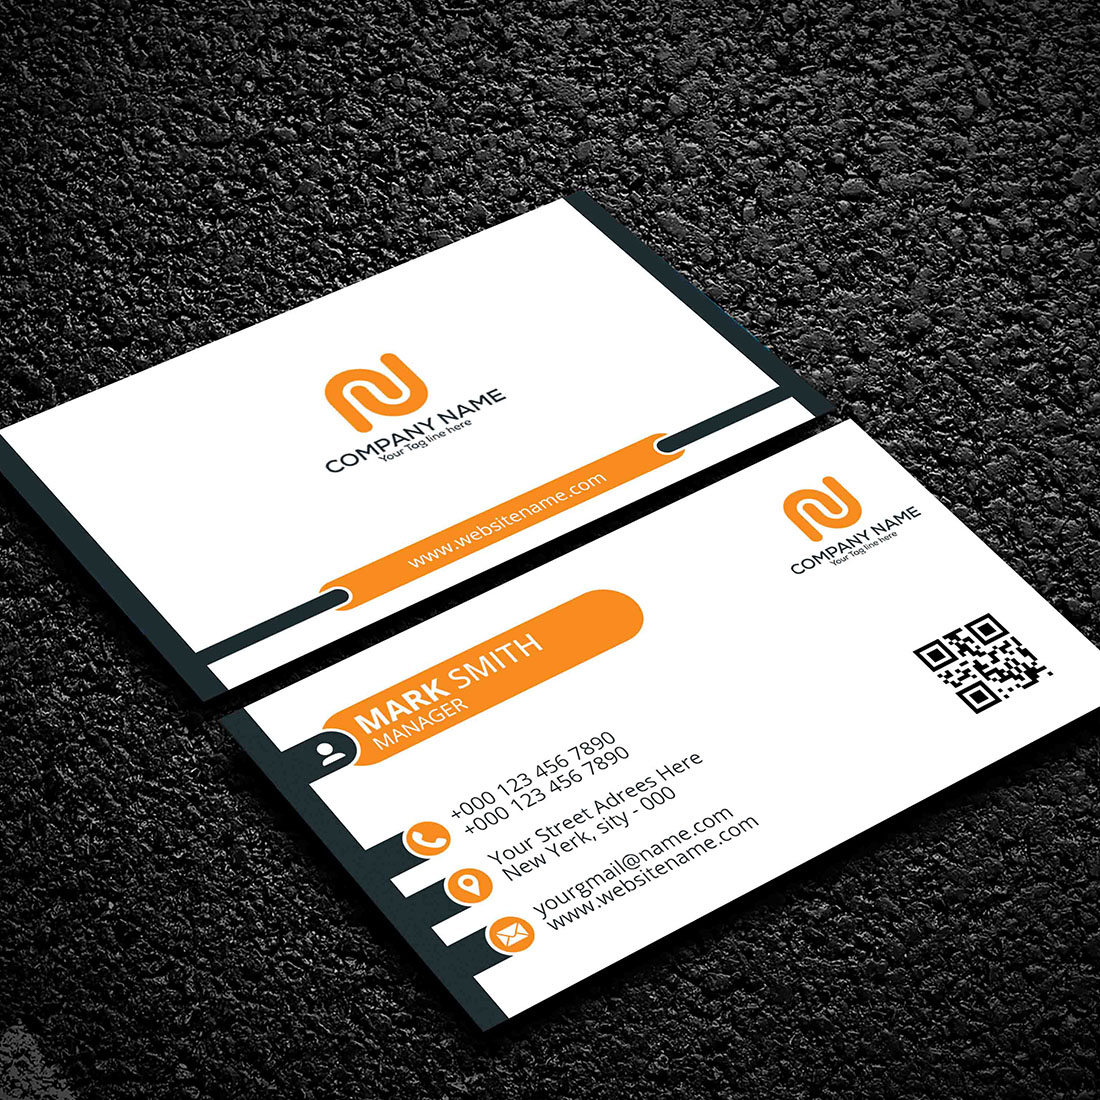 Modern and creative business card design template psd file, eps file, ai file preview image.